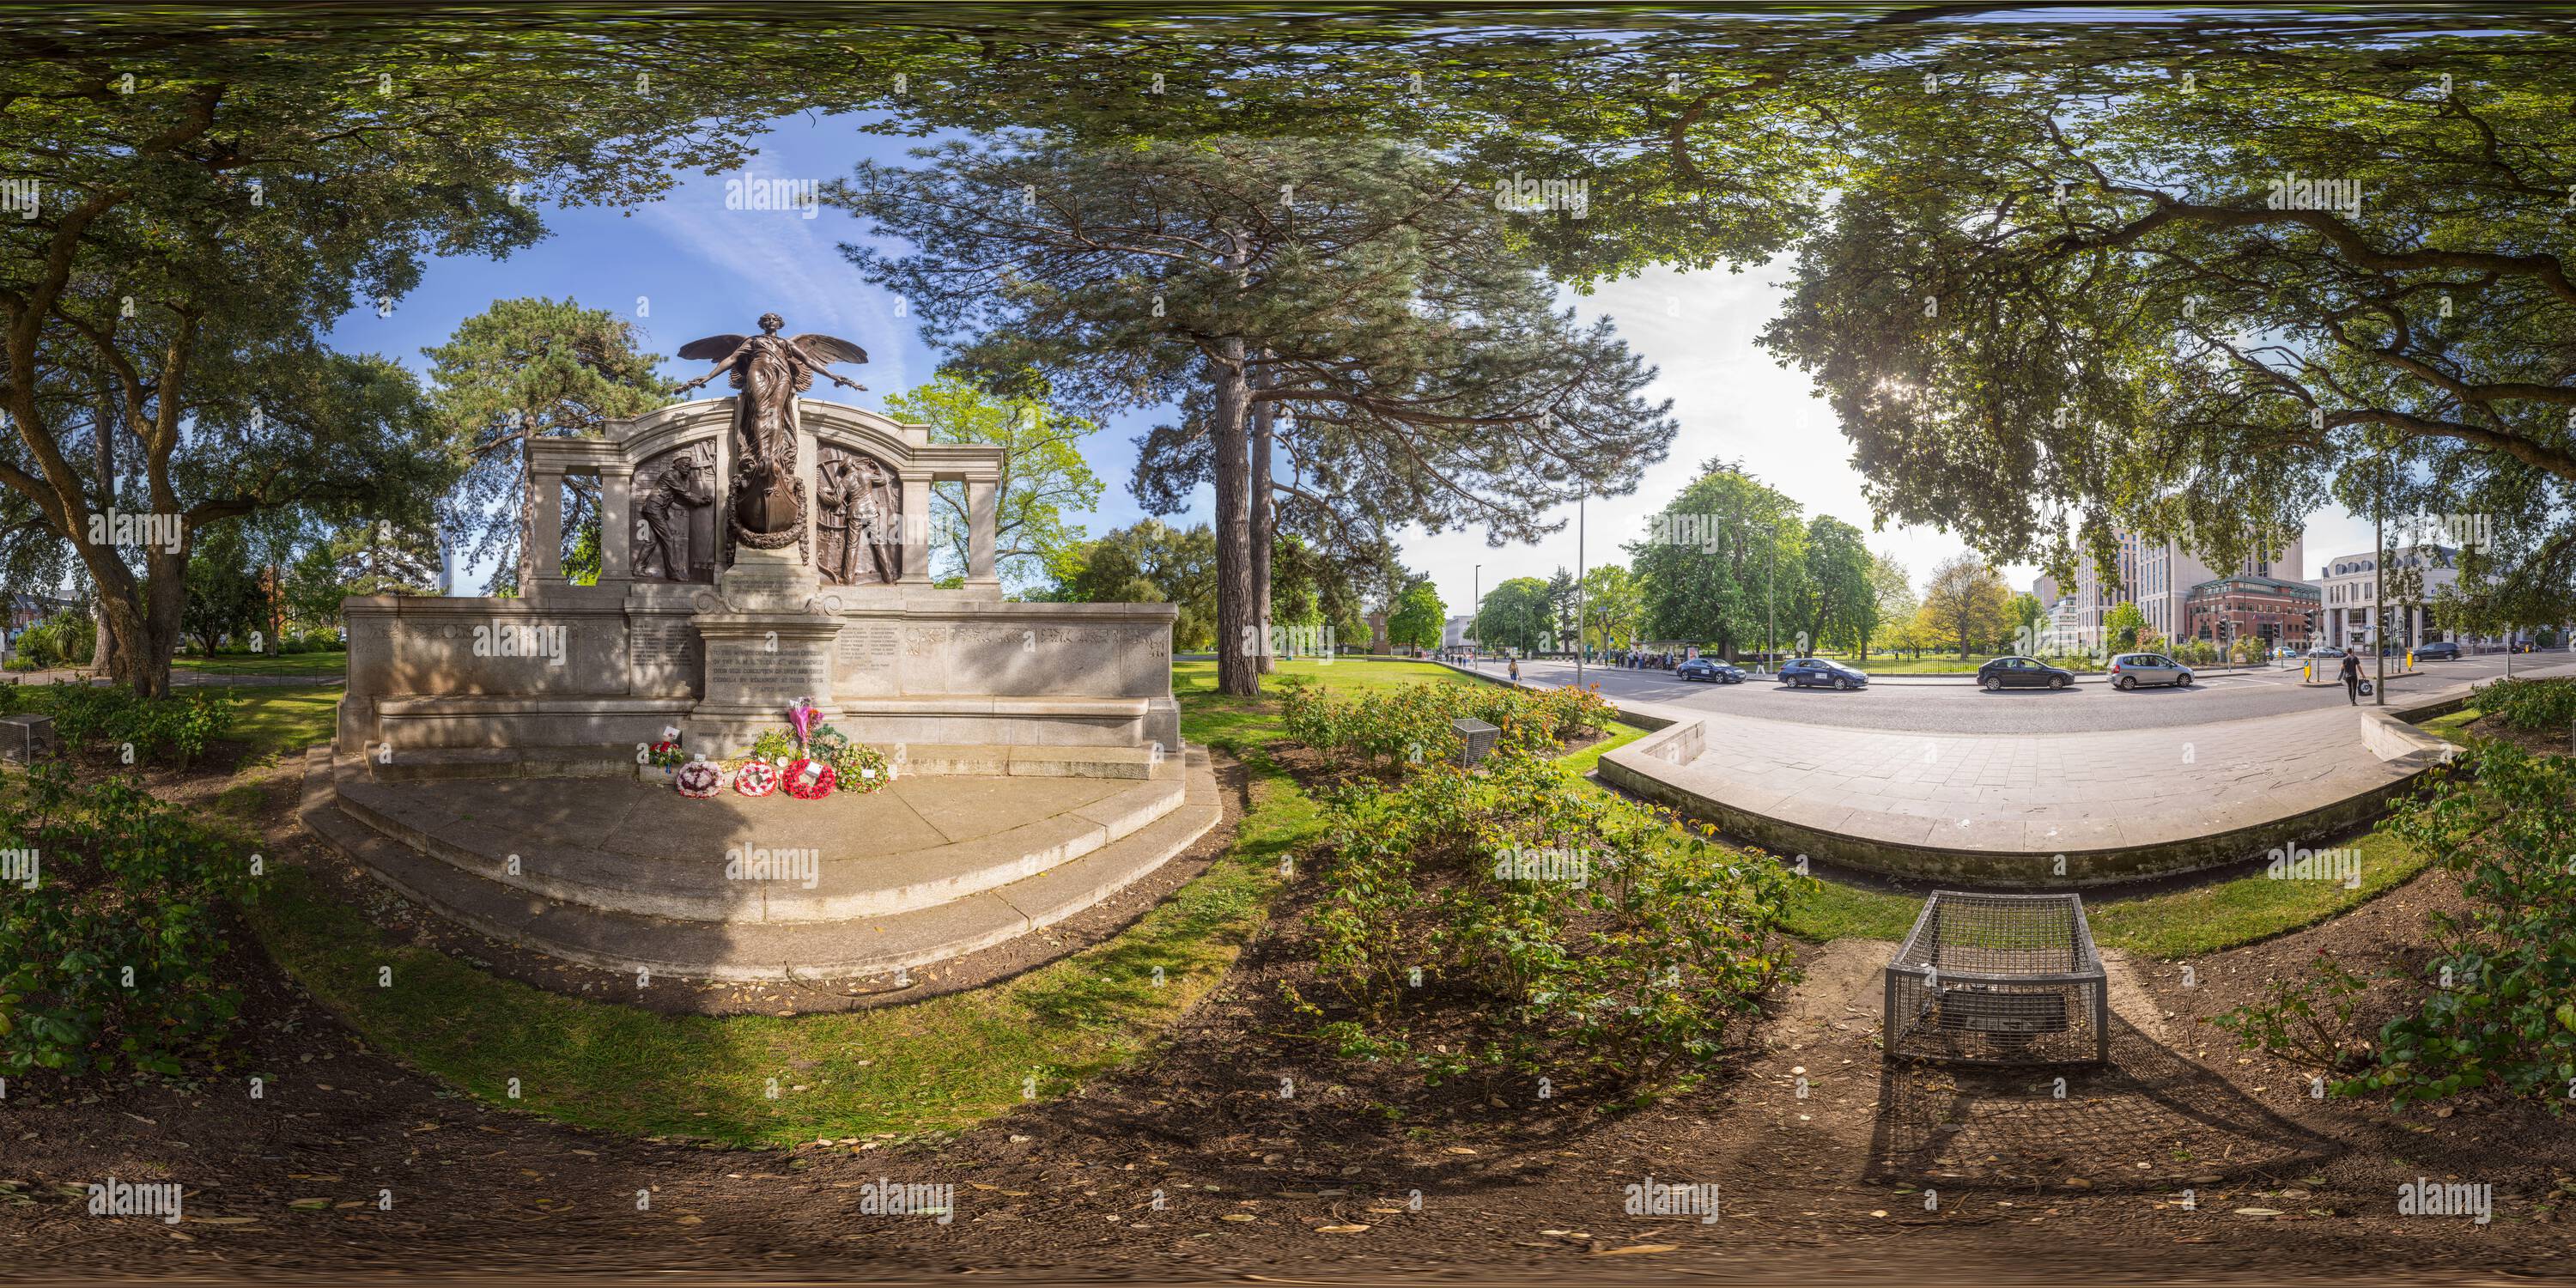 360 degree panoramic view of The bronze and granite Titanic Memorial in East Park (or Andrews Park), Southampton UK, for the engineers lost when RMS Titanic sank on 15 April 1912